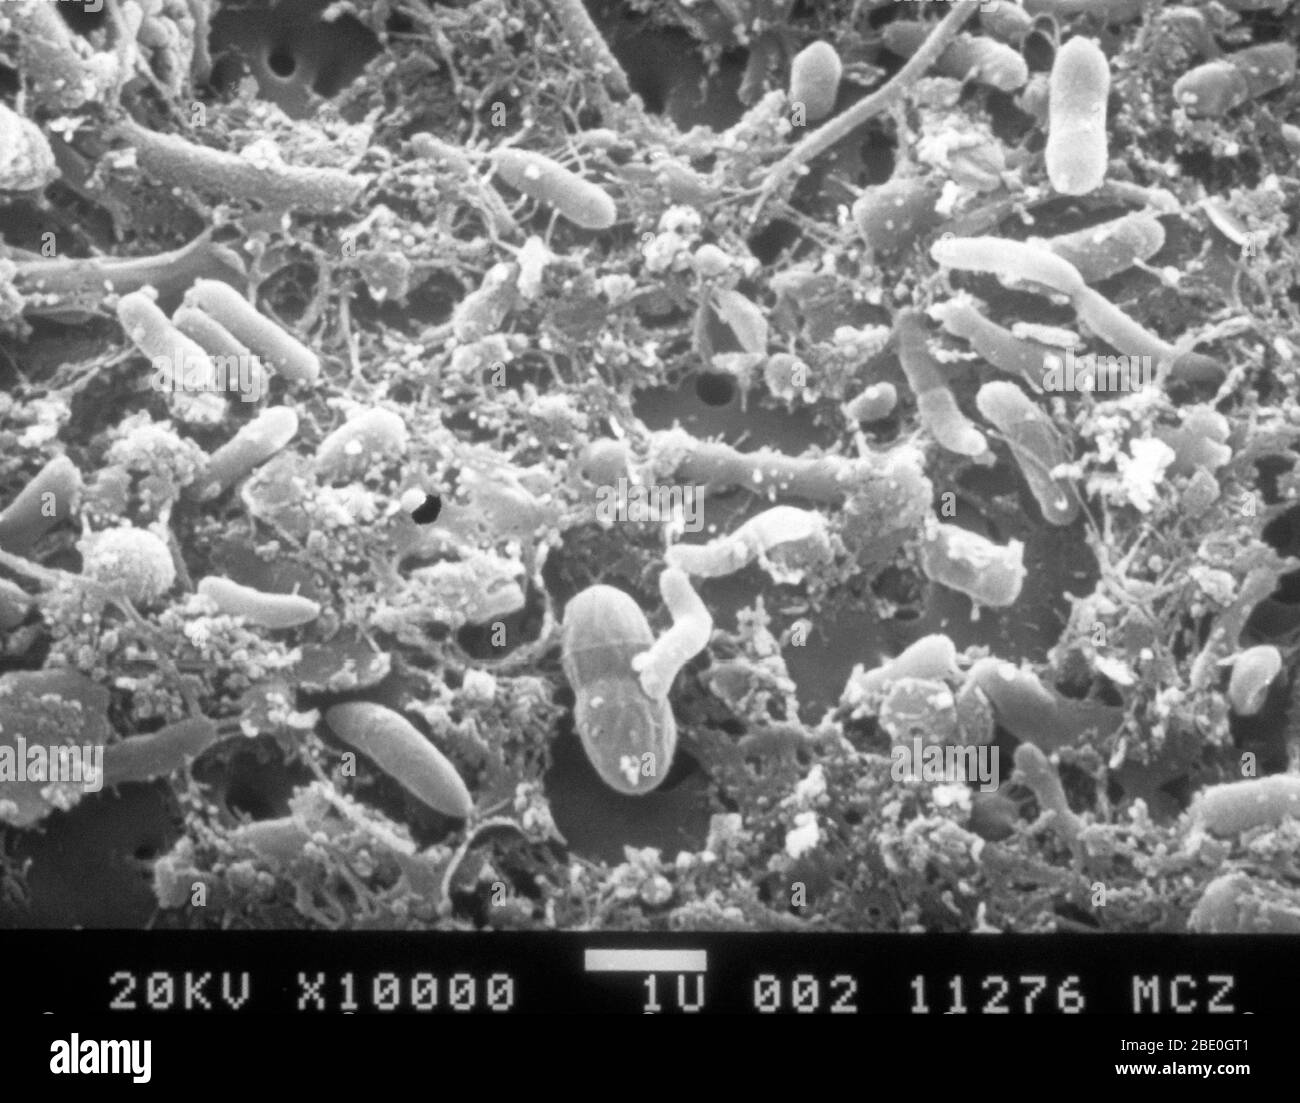 Scanning Electron Micrograph (SEM) of raw sewage filtered onto a nucleopore membrane. Note the bacteria embedded in organic material. Magnification 100,000x at 35mm image size. Stock Photo